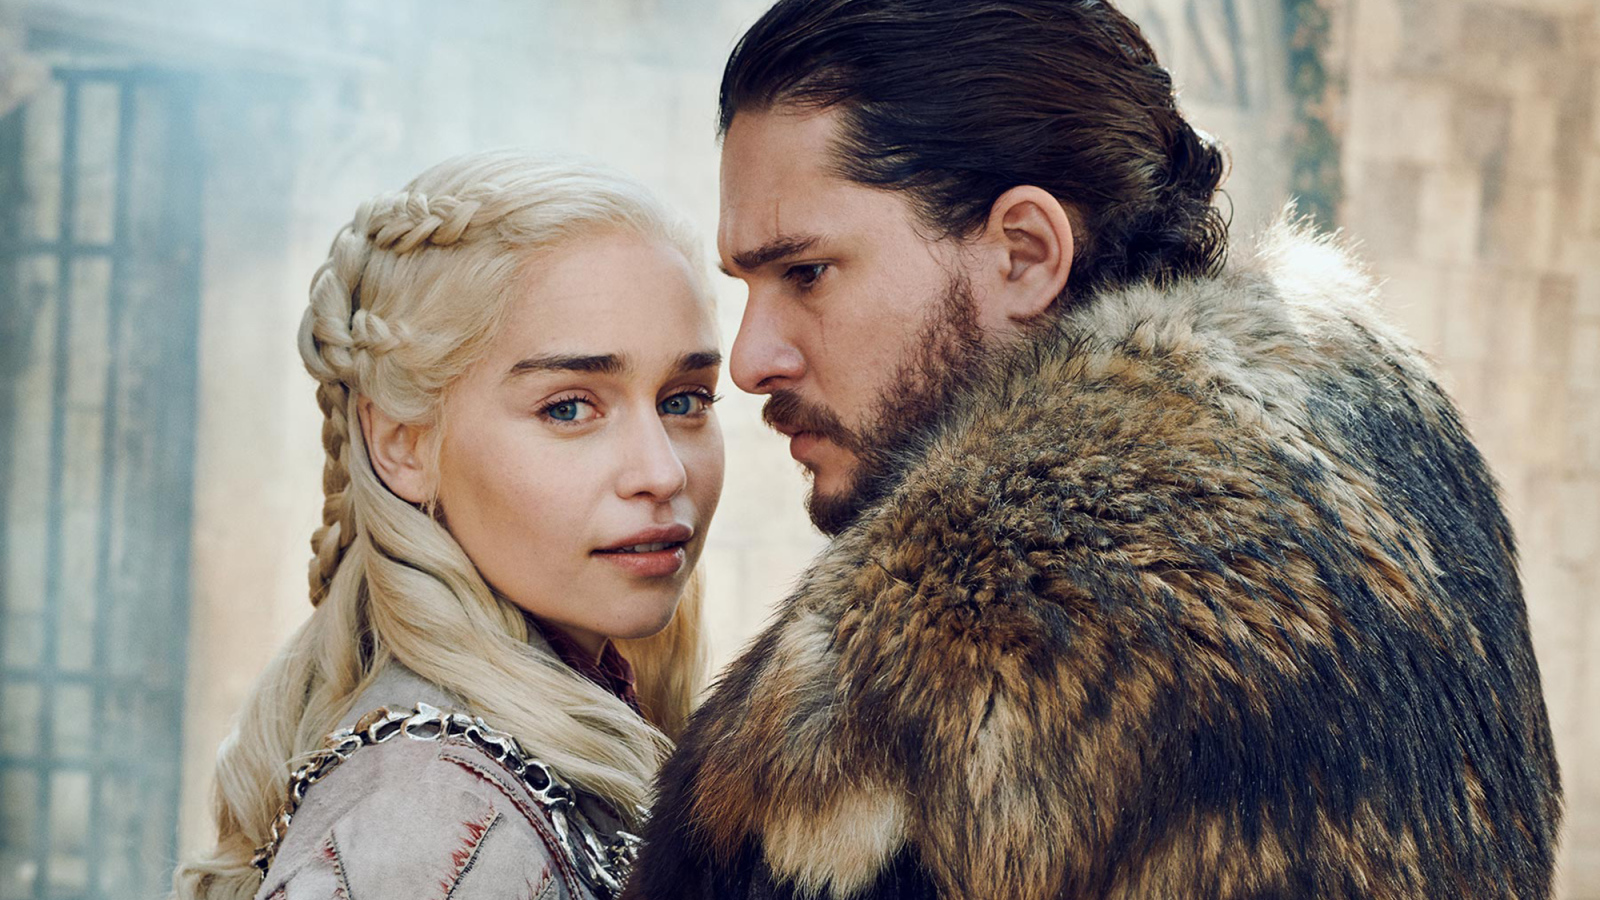 The characters in the movie Game of Thrones, John Snow and Daenerys Targaryen